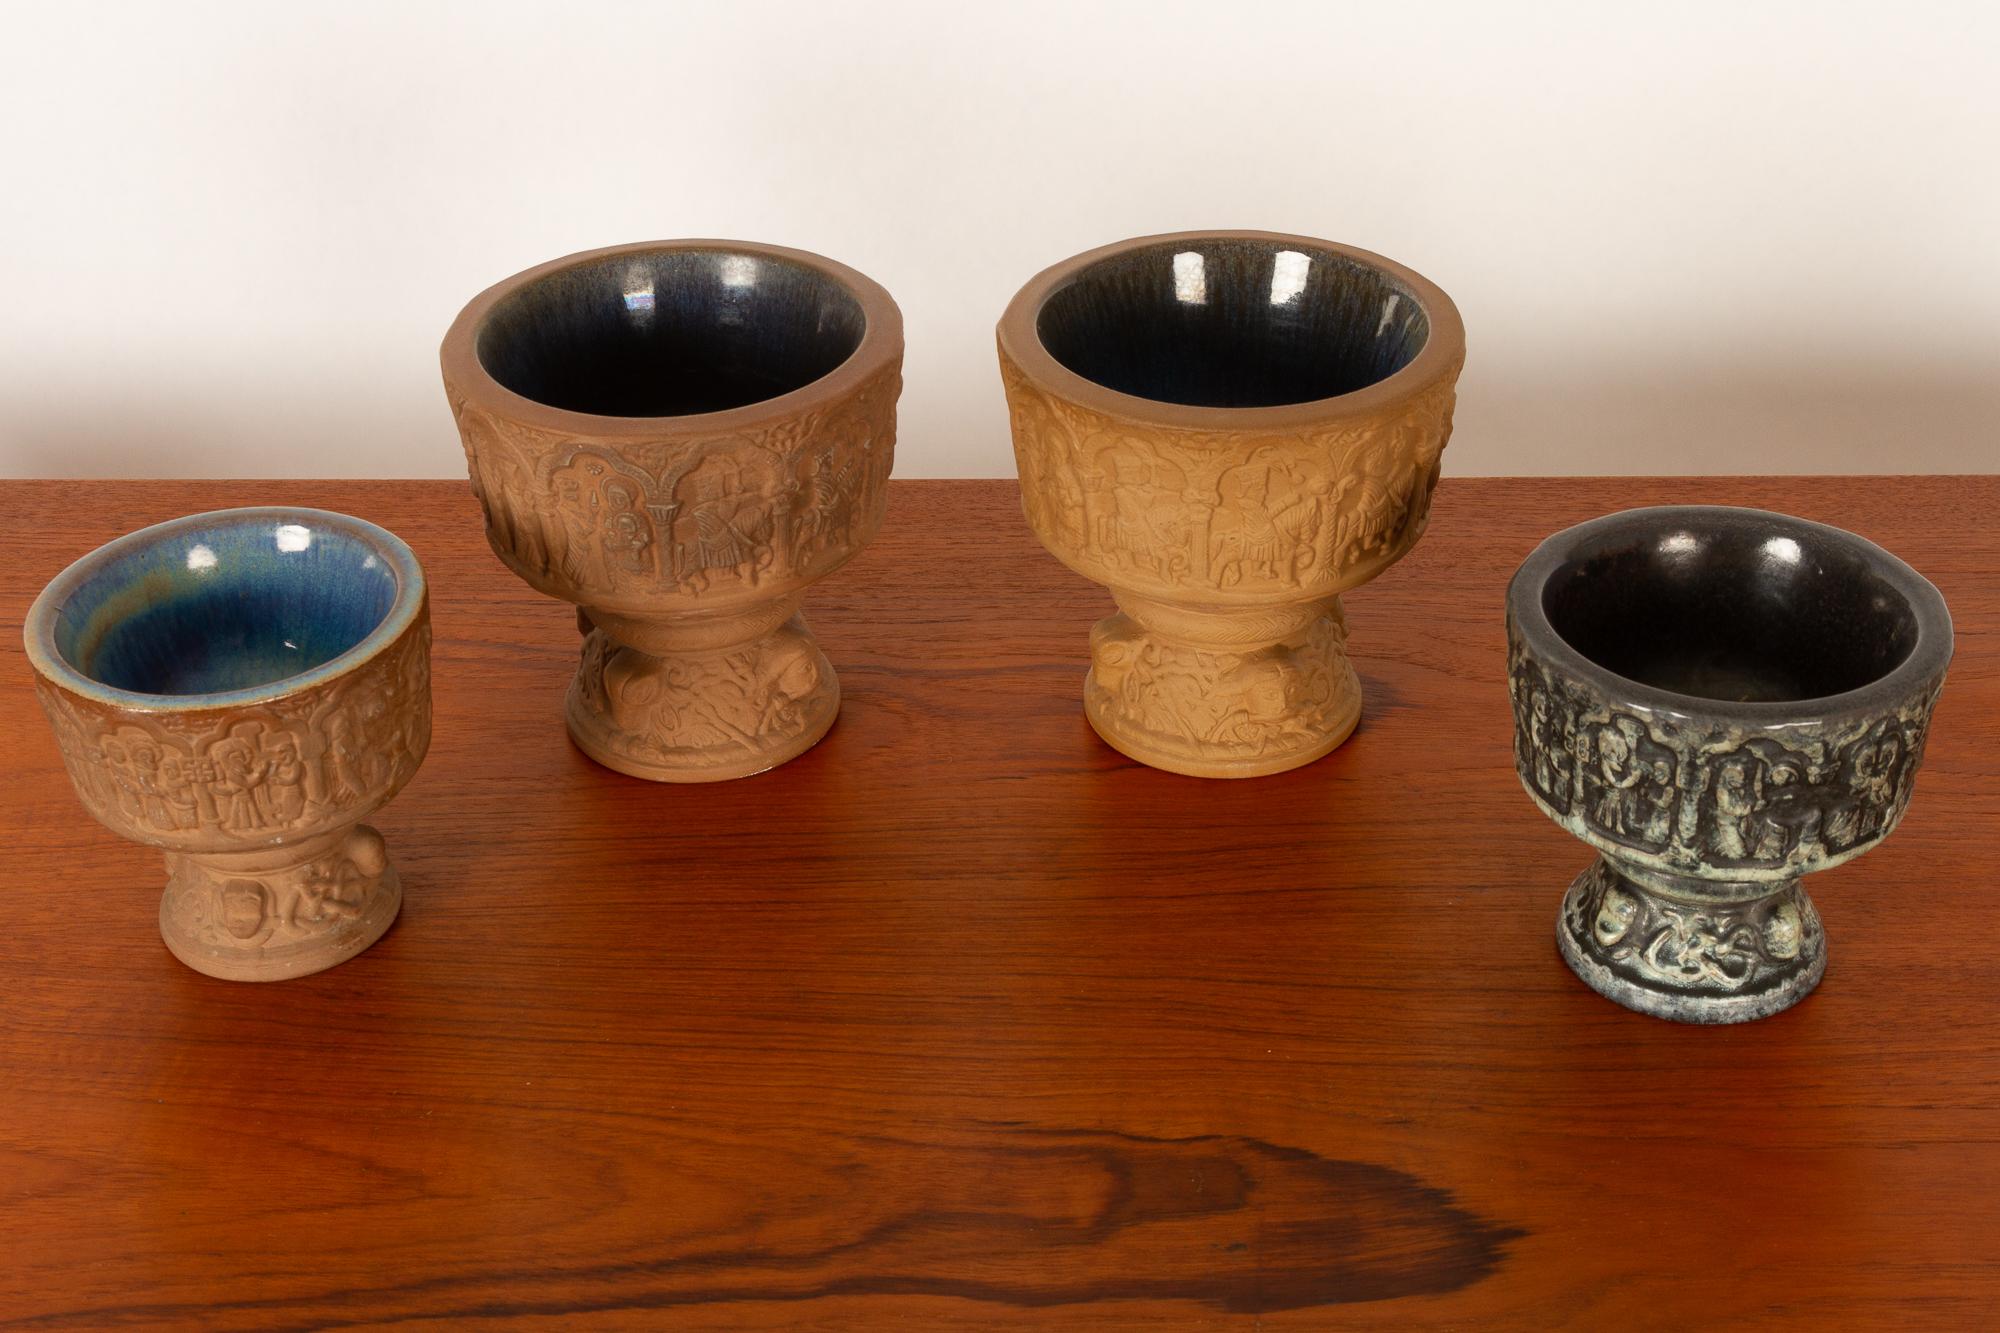 Danish bowls by Michael Andersen, 1960s.
Set of four ceramic cups inspired by a baptismal font from the 13th century located in a church on the Danish island of Bornholm.
The cups are raw ceramic on the outside, and glazed inside. Can be used as